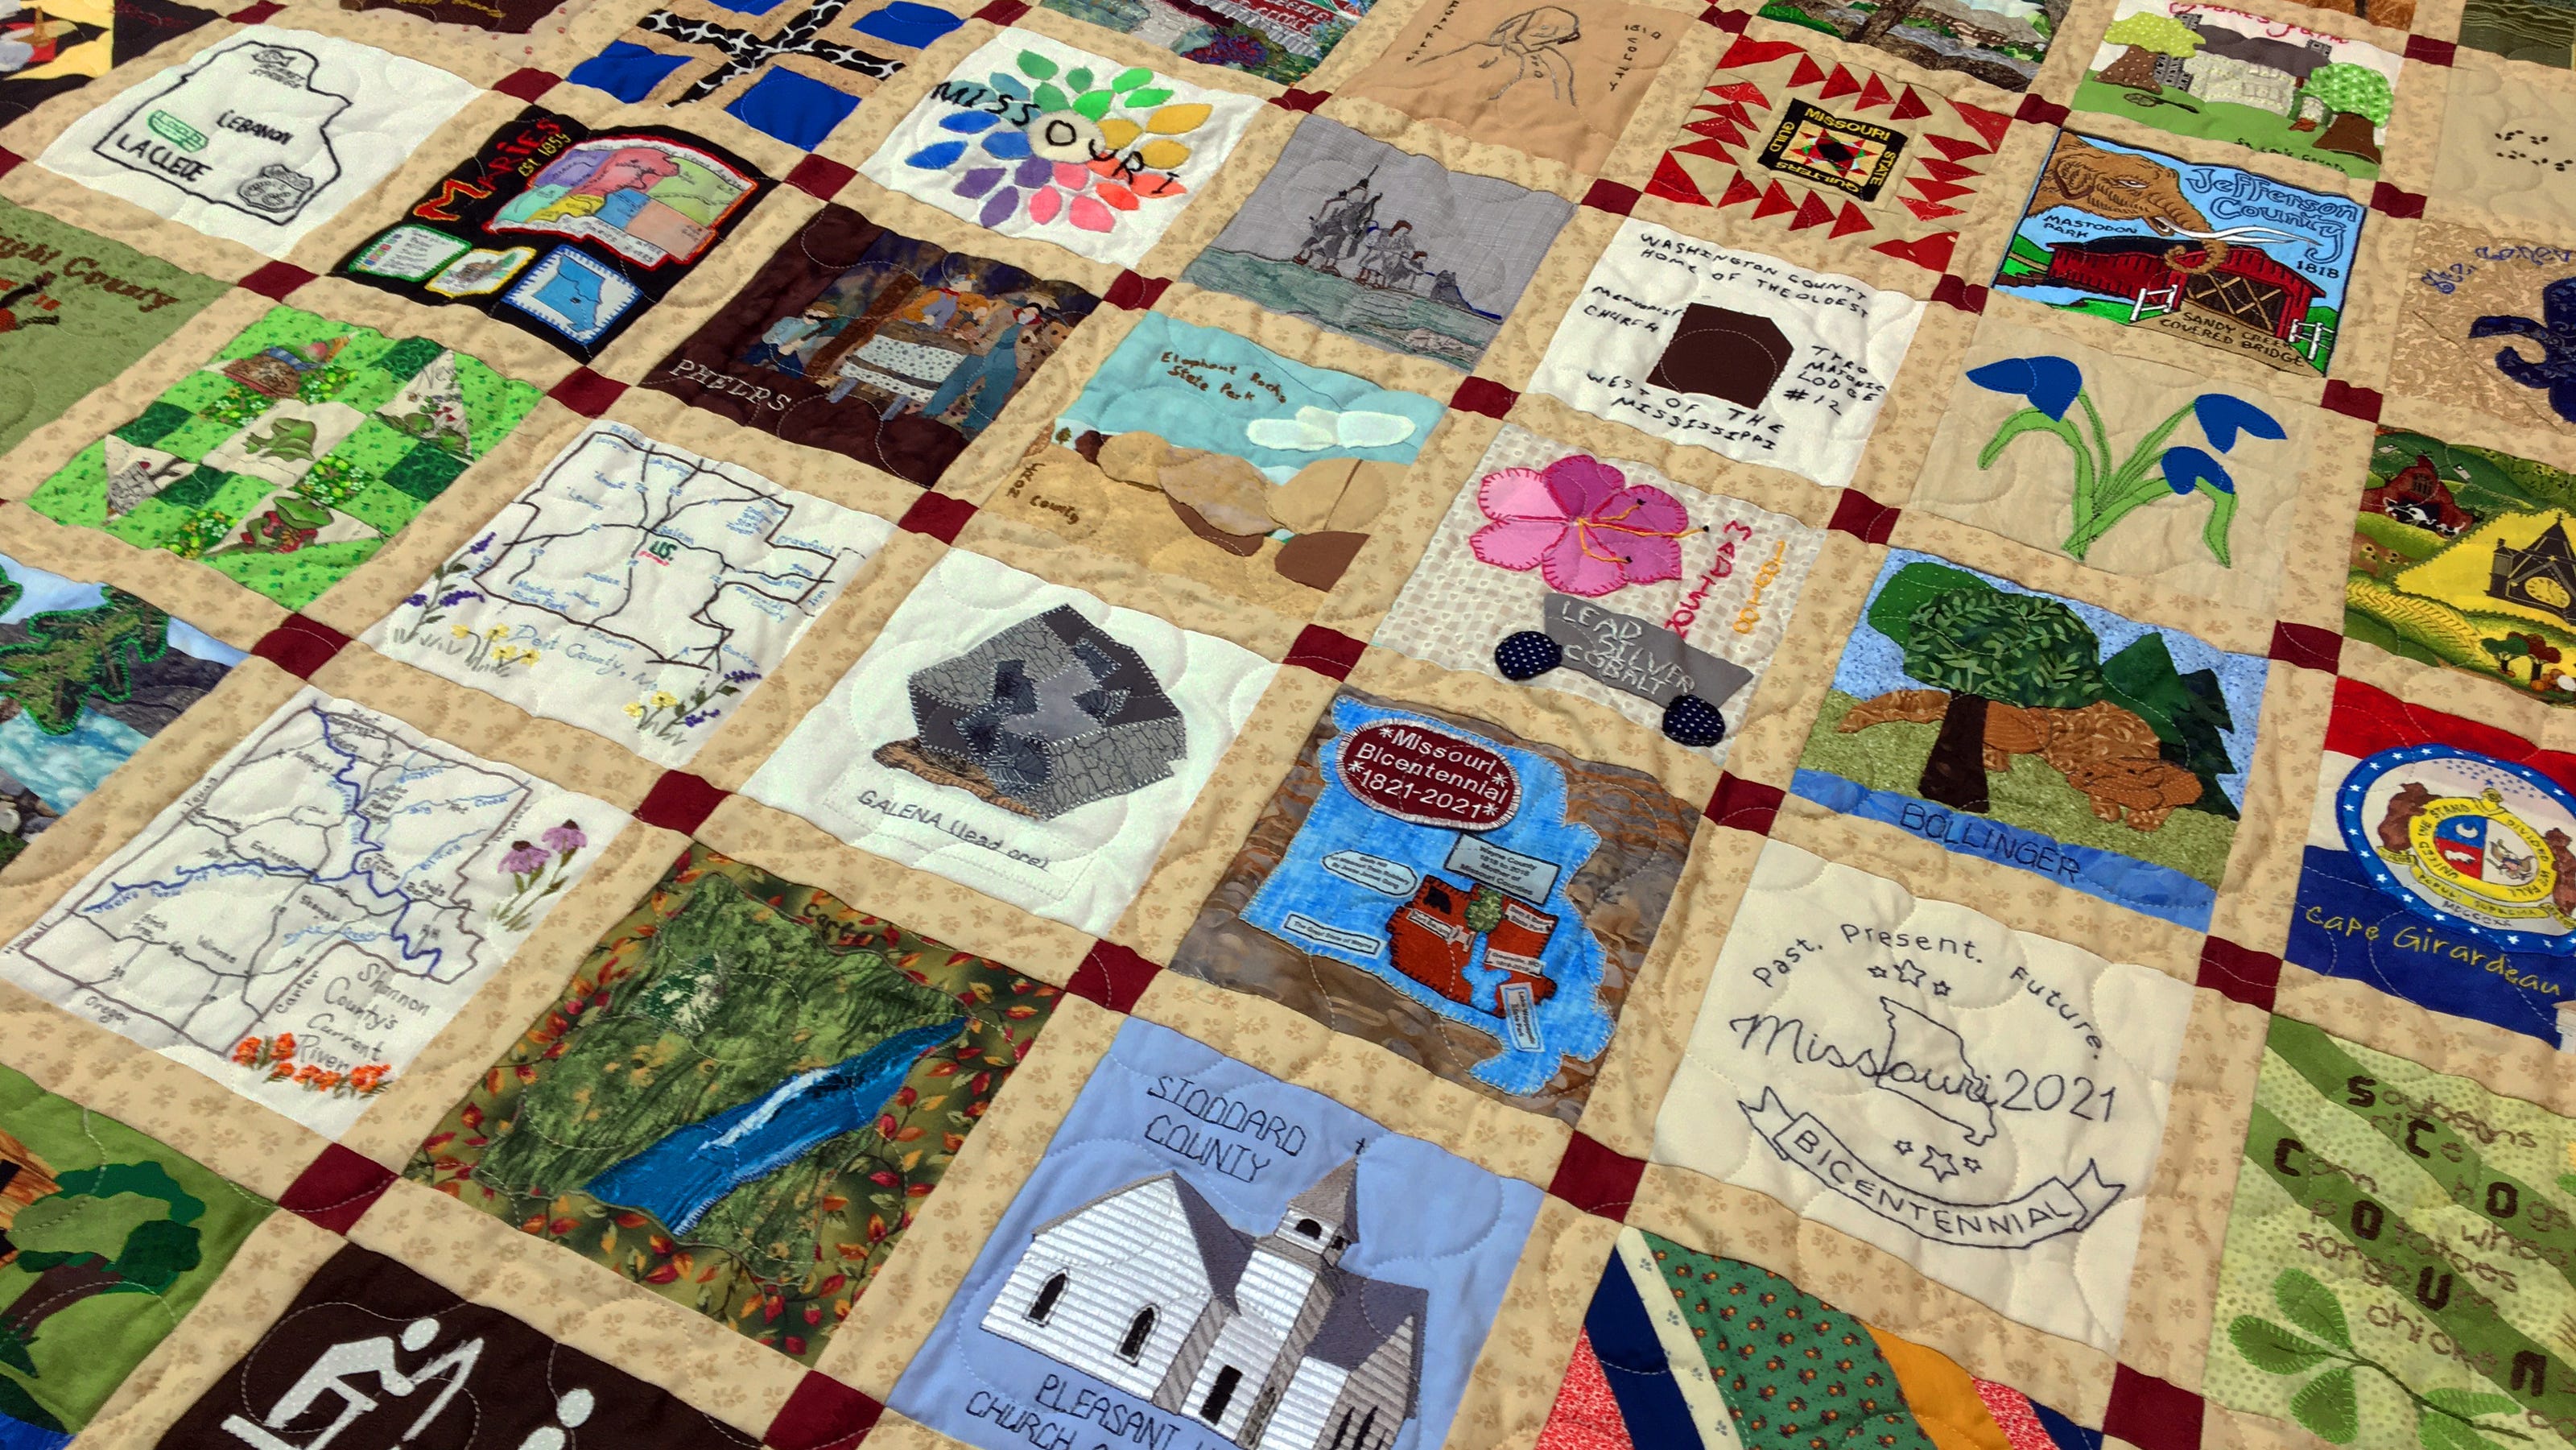 200 years of Missouri: History Museum on the Square exhibits quilt